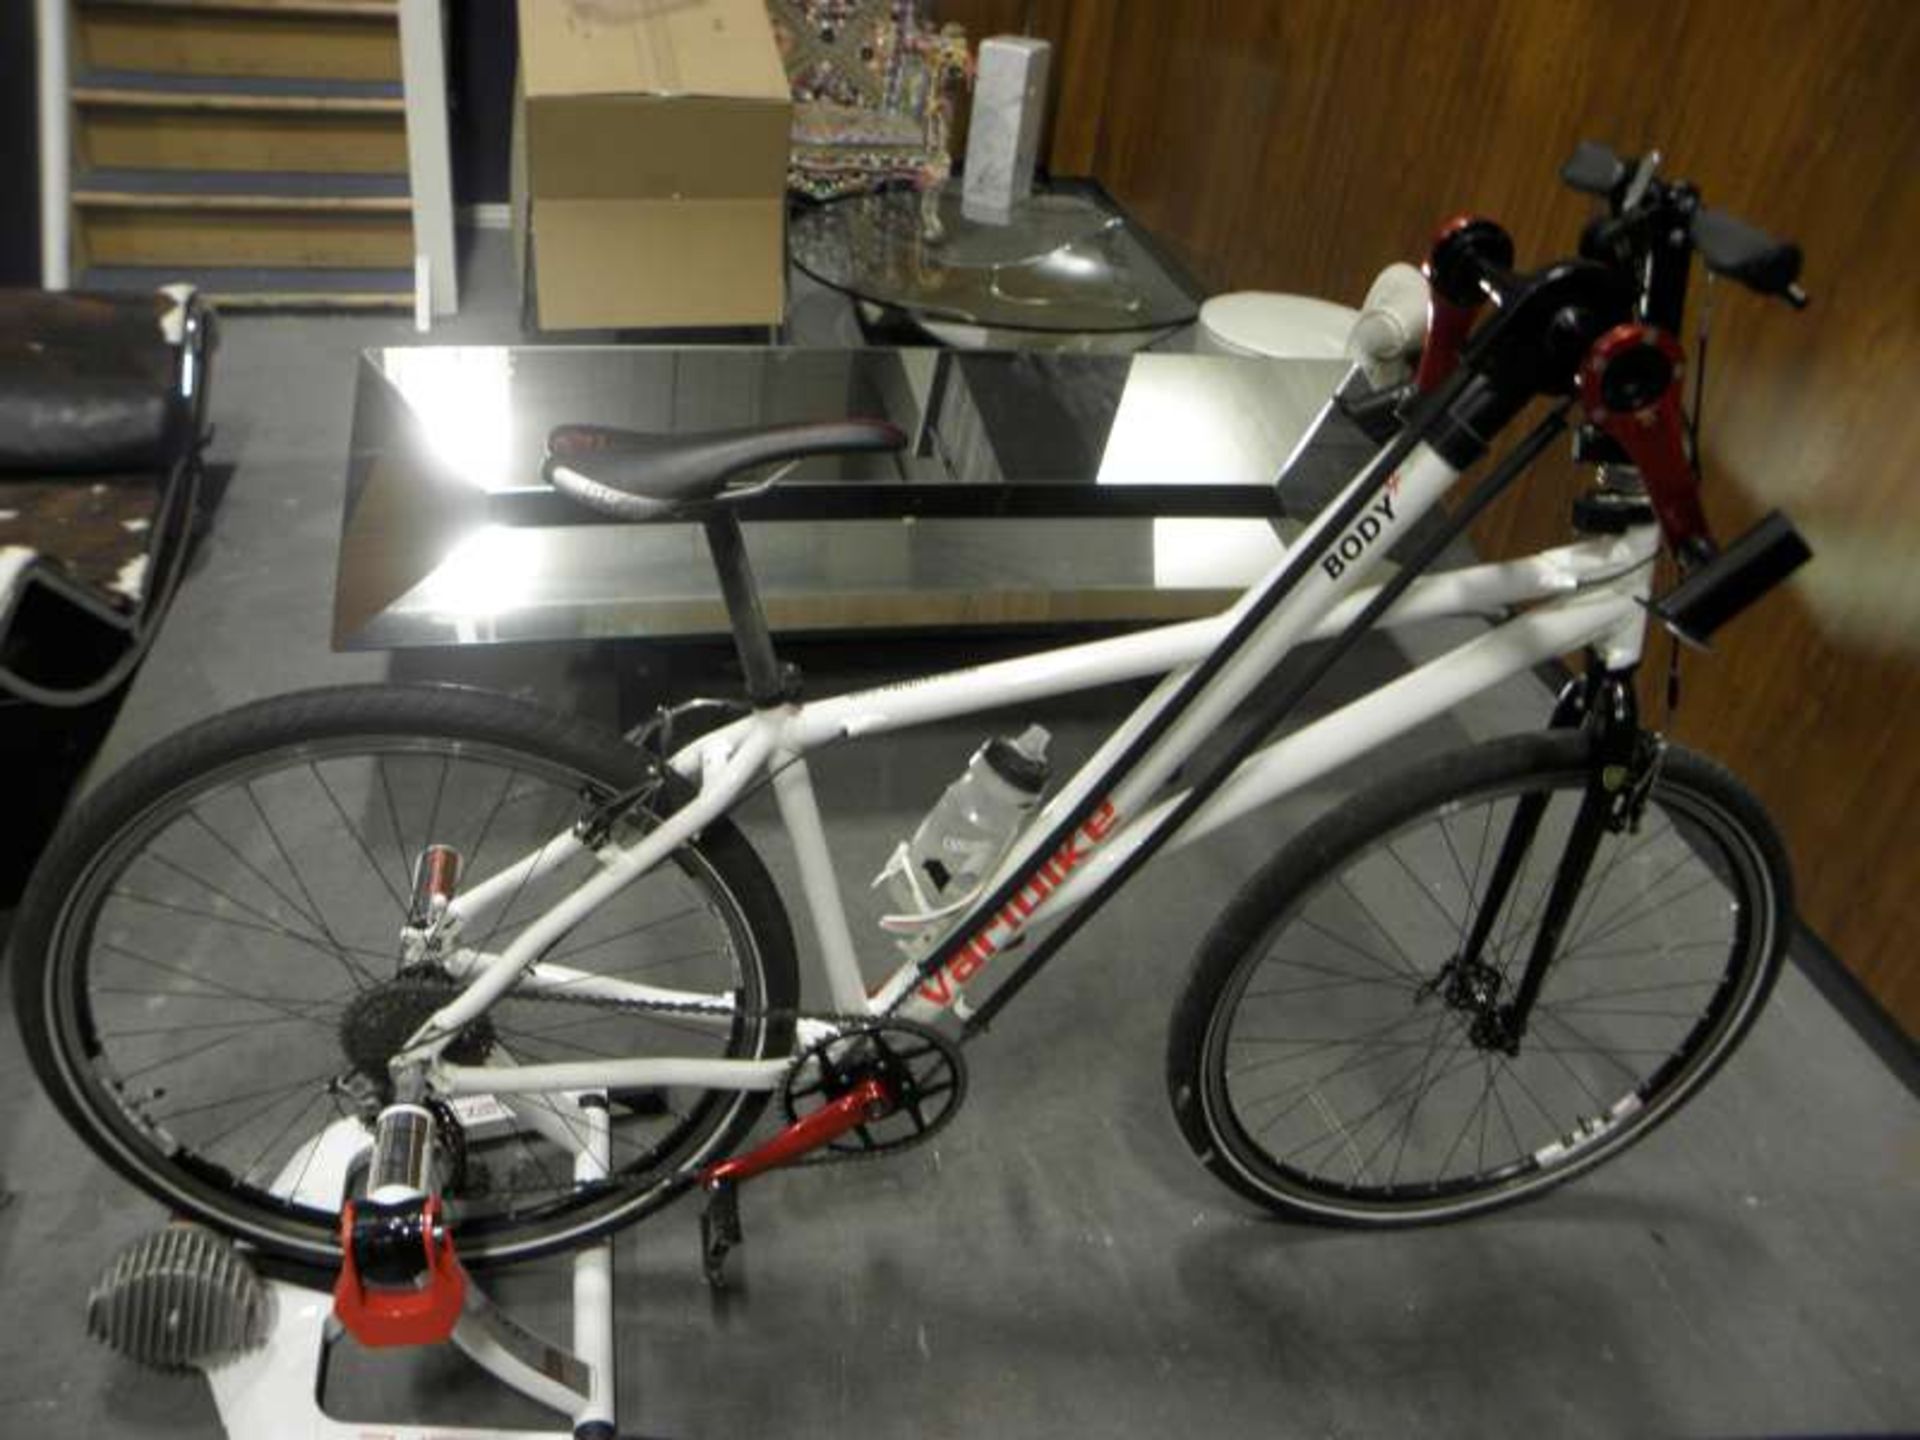 10 SPEED BODY 4 VARIBIKE WITH AN ELITE QUBO TURBO TRAINER STAND